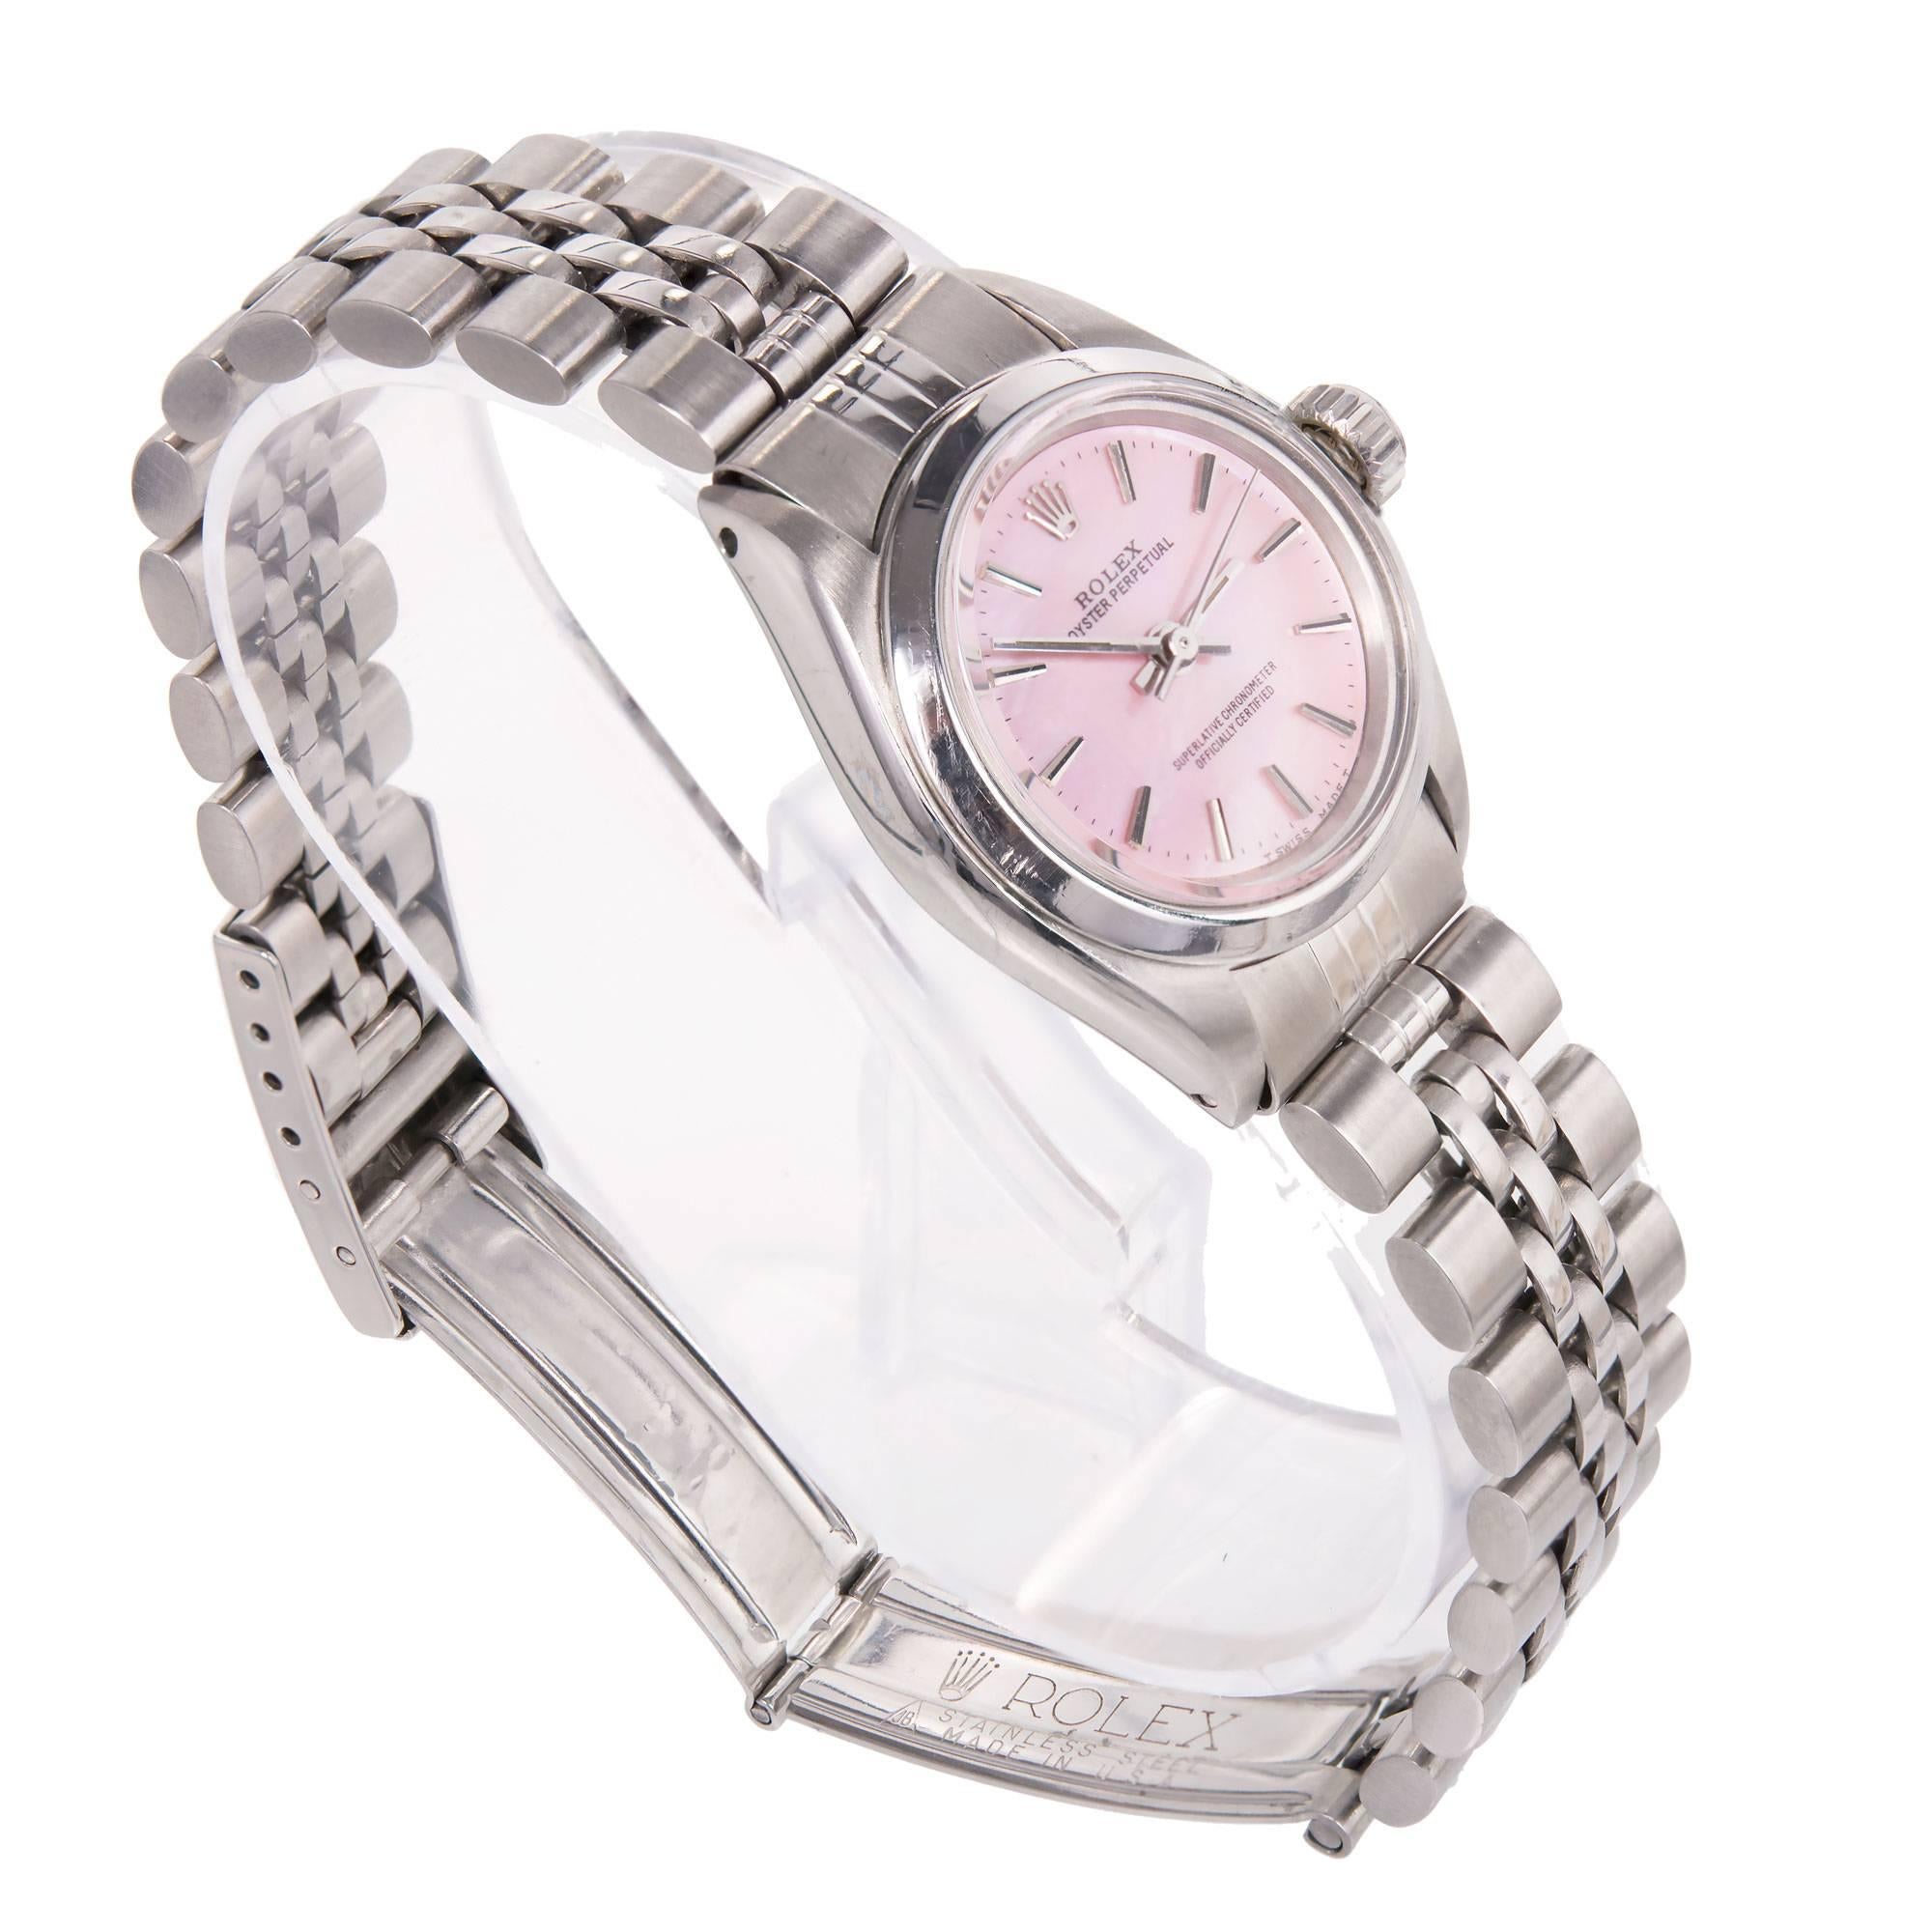 Rolex lady's stainless steel Oyster Perpetual wristwatch with redone custom pink mother-of-pearl dial not original to watch. Ref. 6718, circa 1977. Plain bezel, Rolex Jubilee bracelet, after-market sapphire crystal.

Stainless steel
Length:6.75